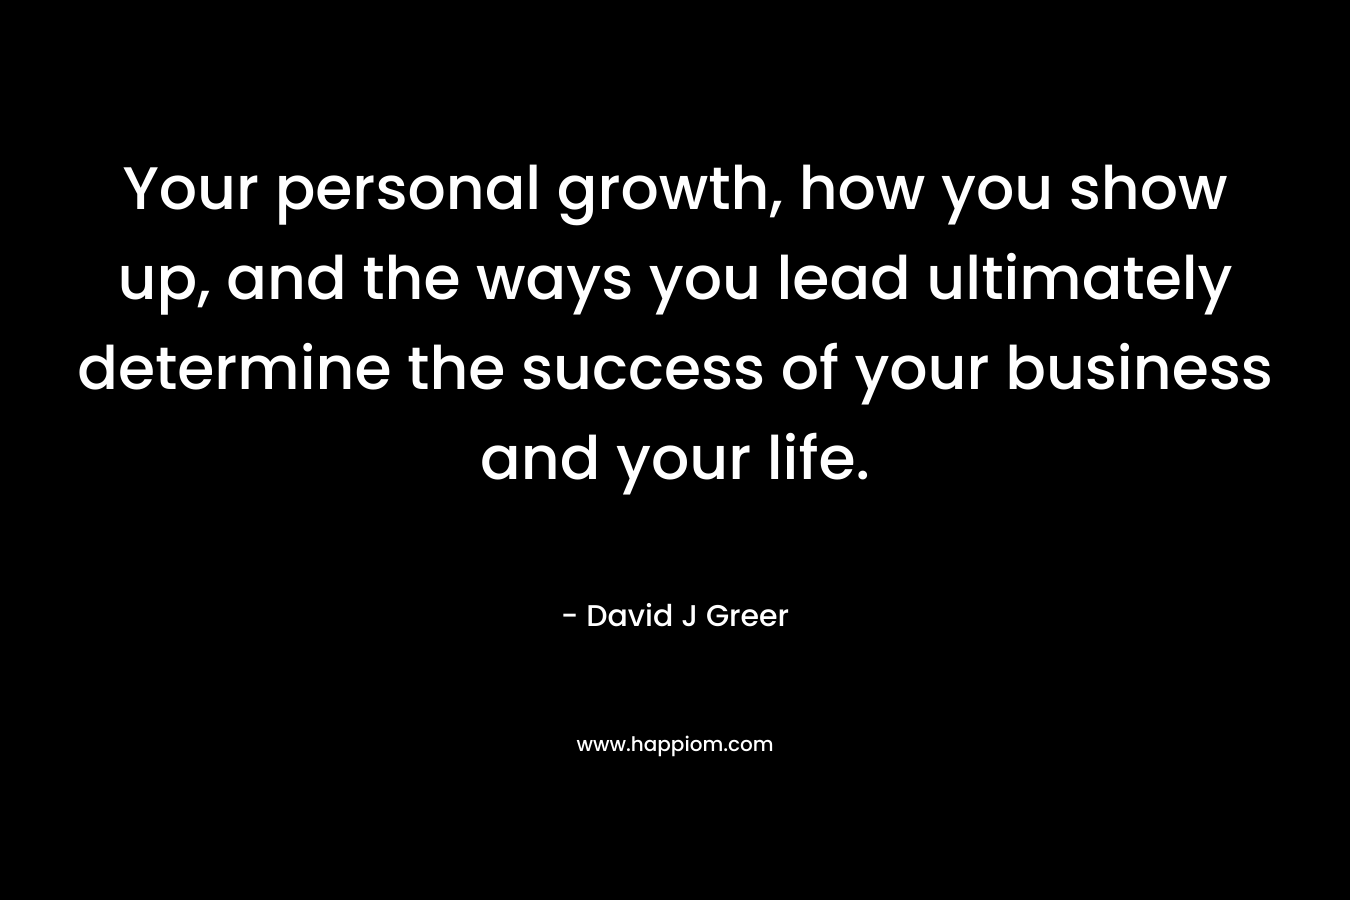 Your personal growth, how you show up, and the ways you lead ultimately determine the success of your business and your life.